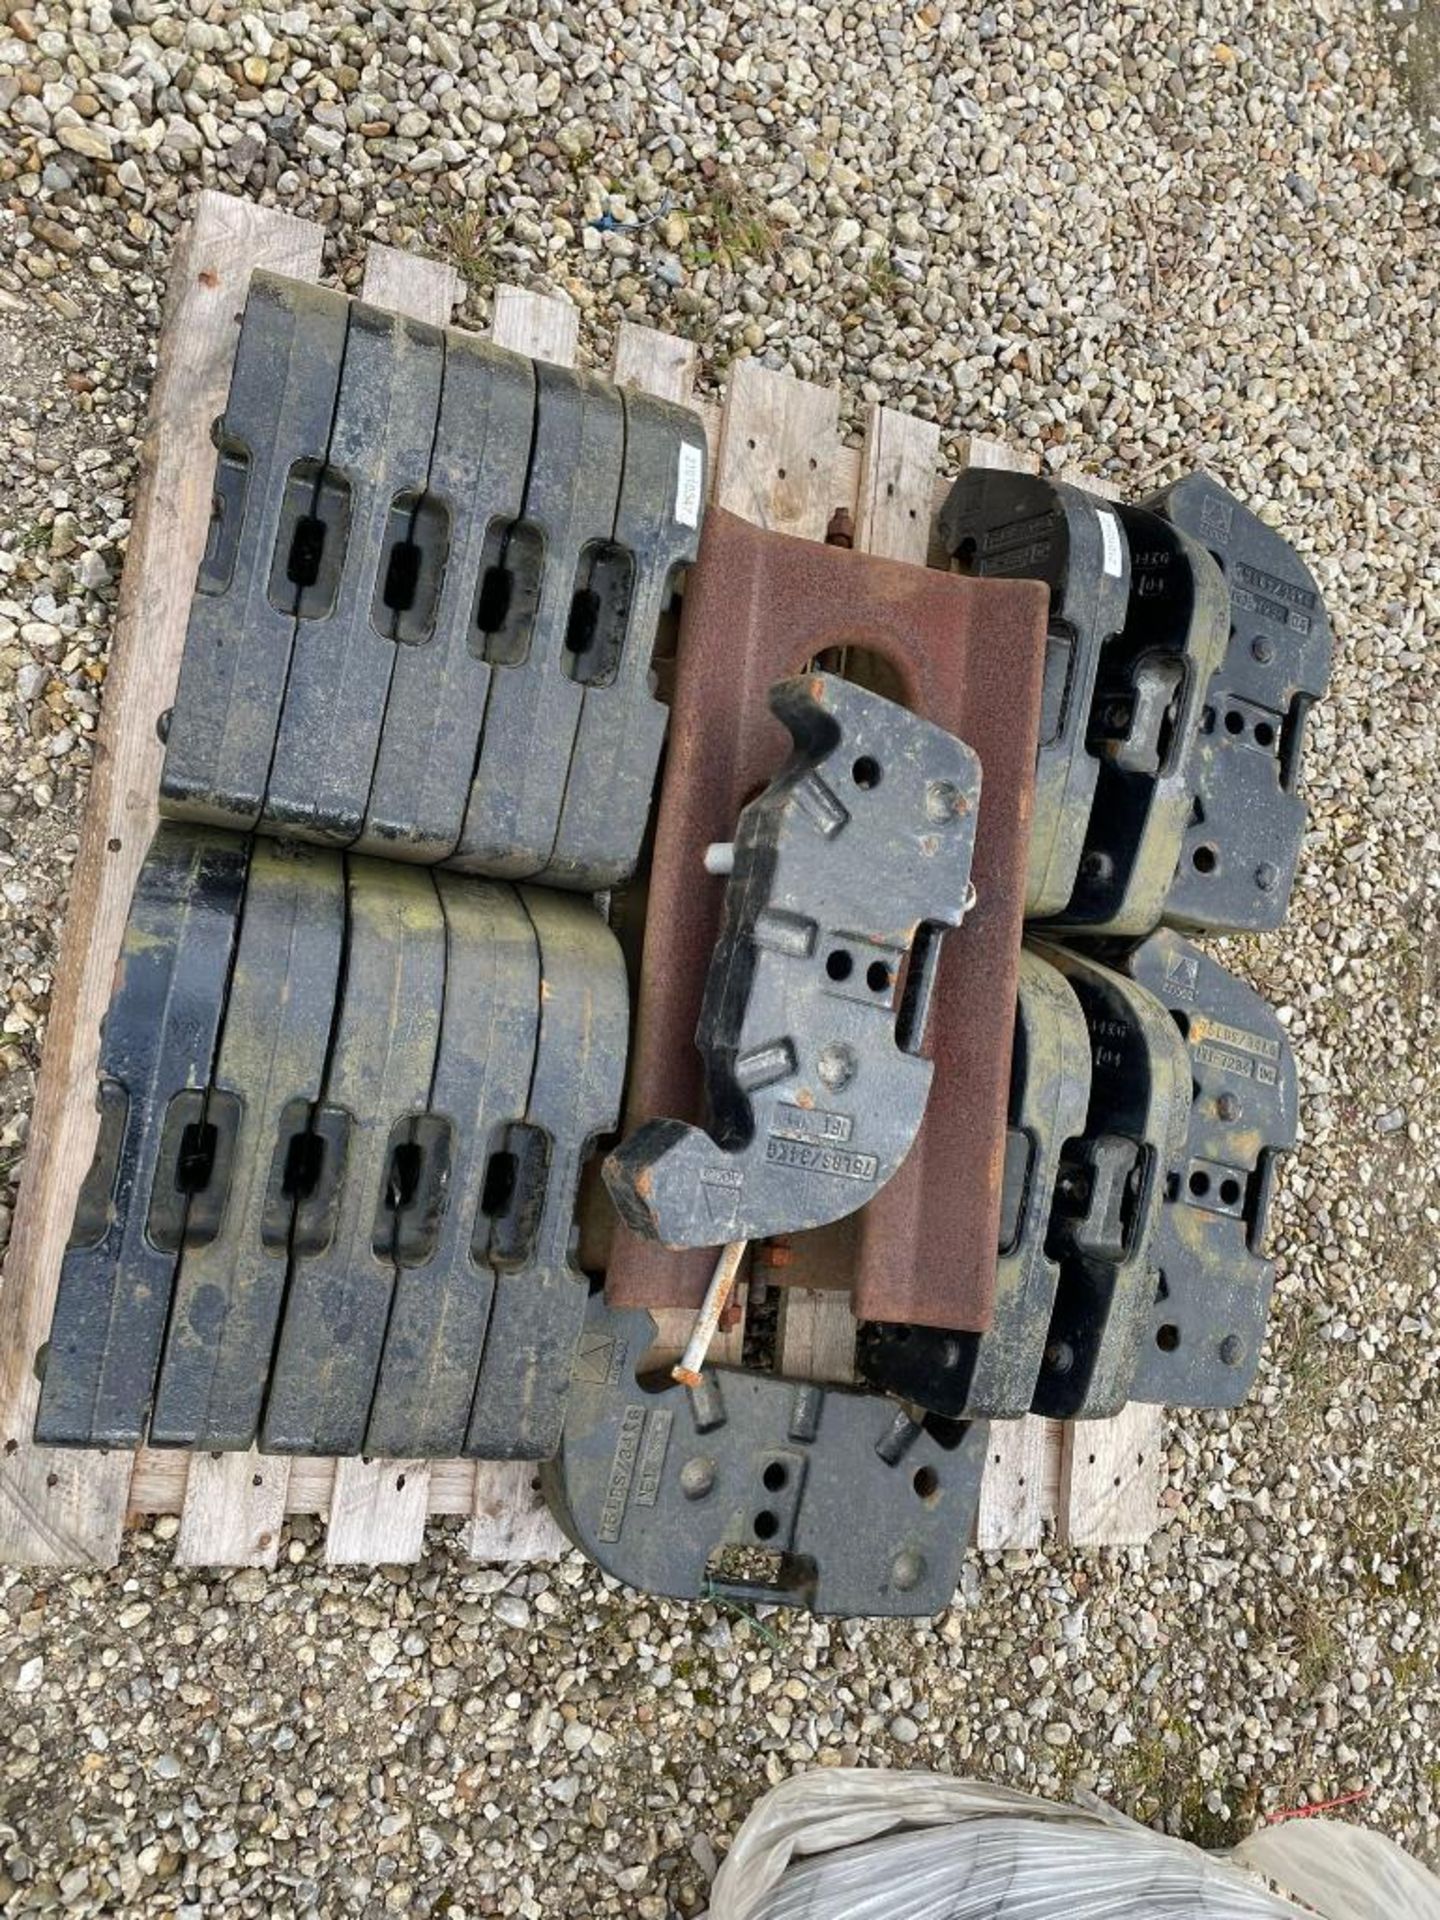 Full set of 34kg AGCO track weights